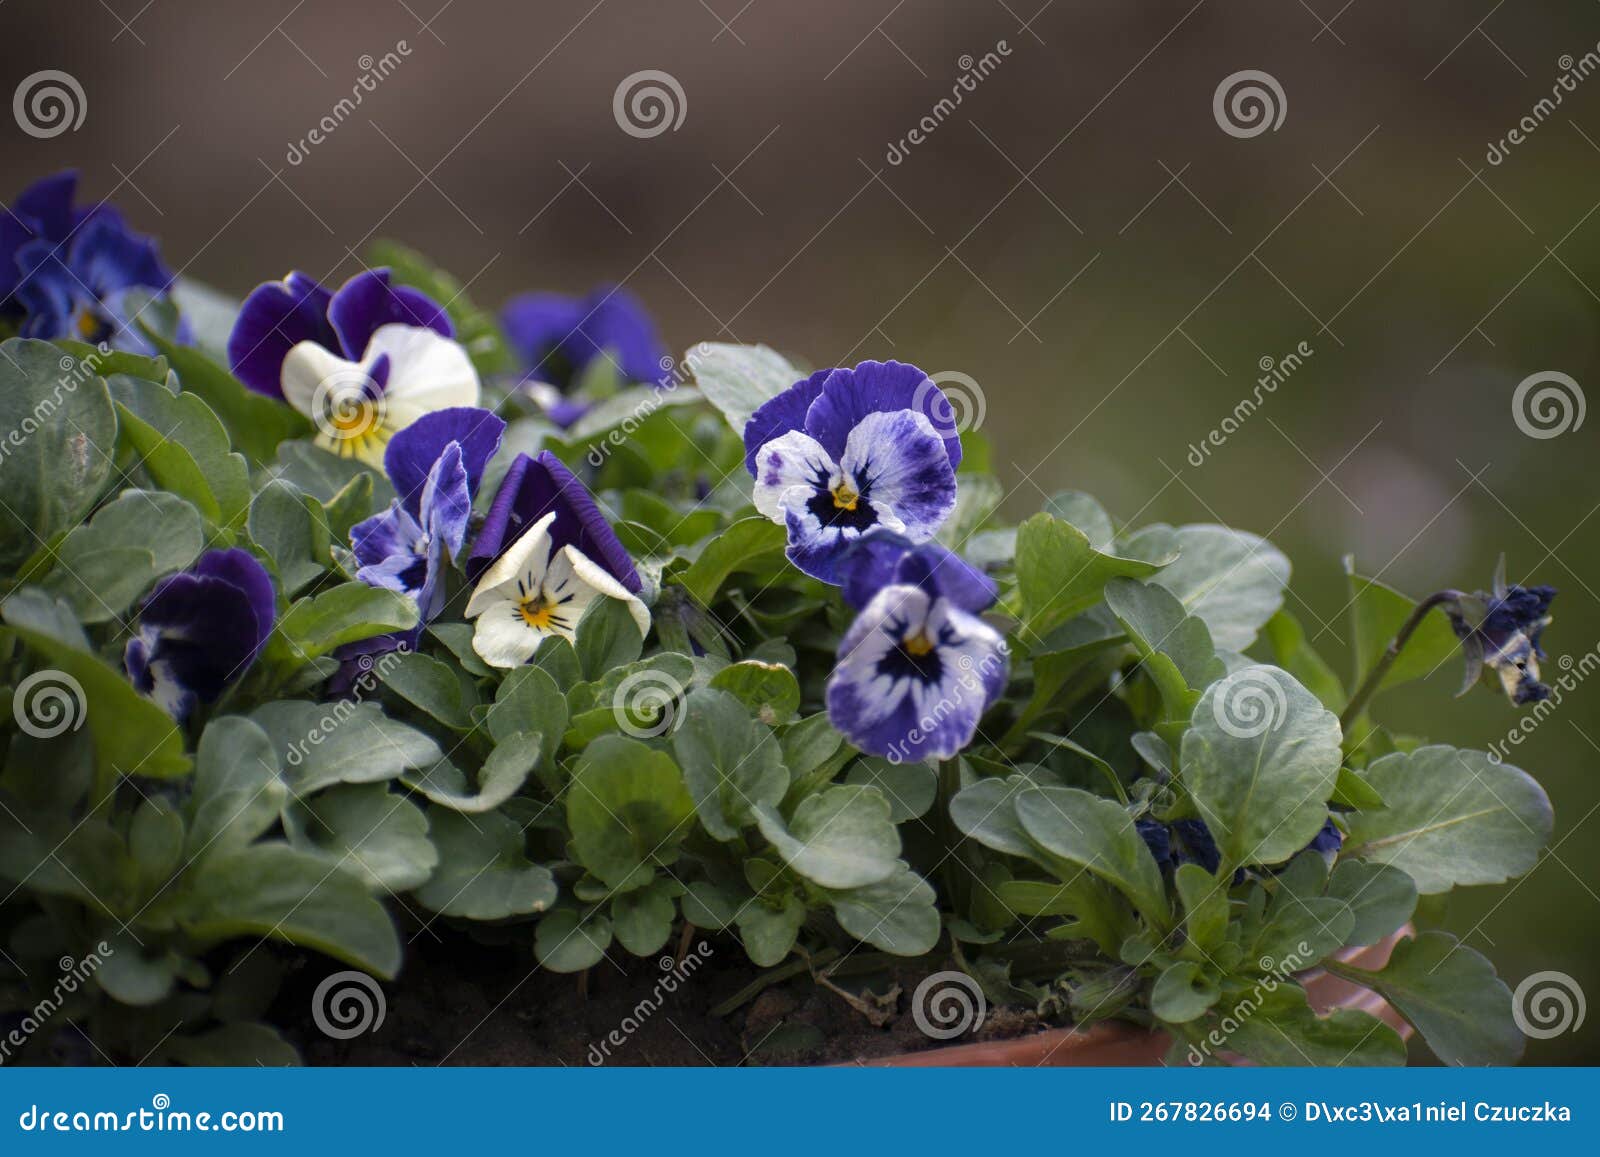 cifra, violet with multi-colored petals.